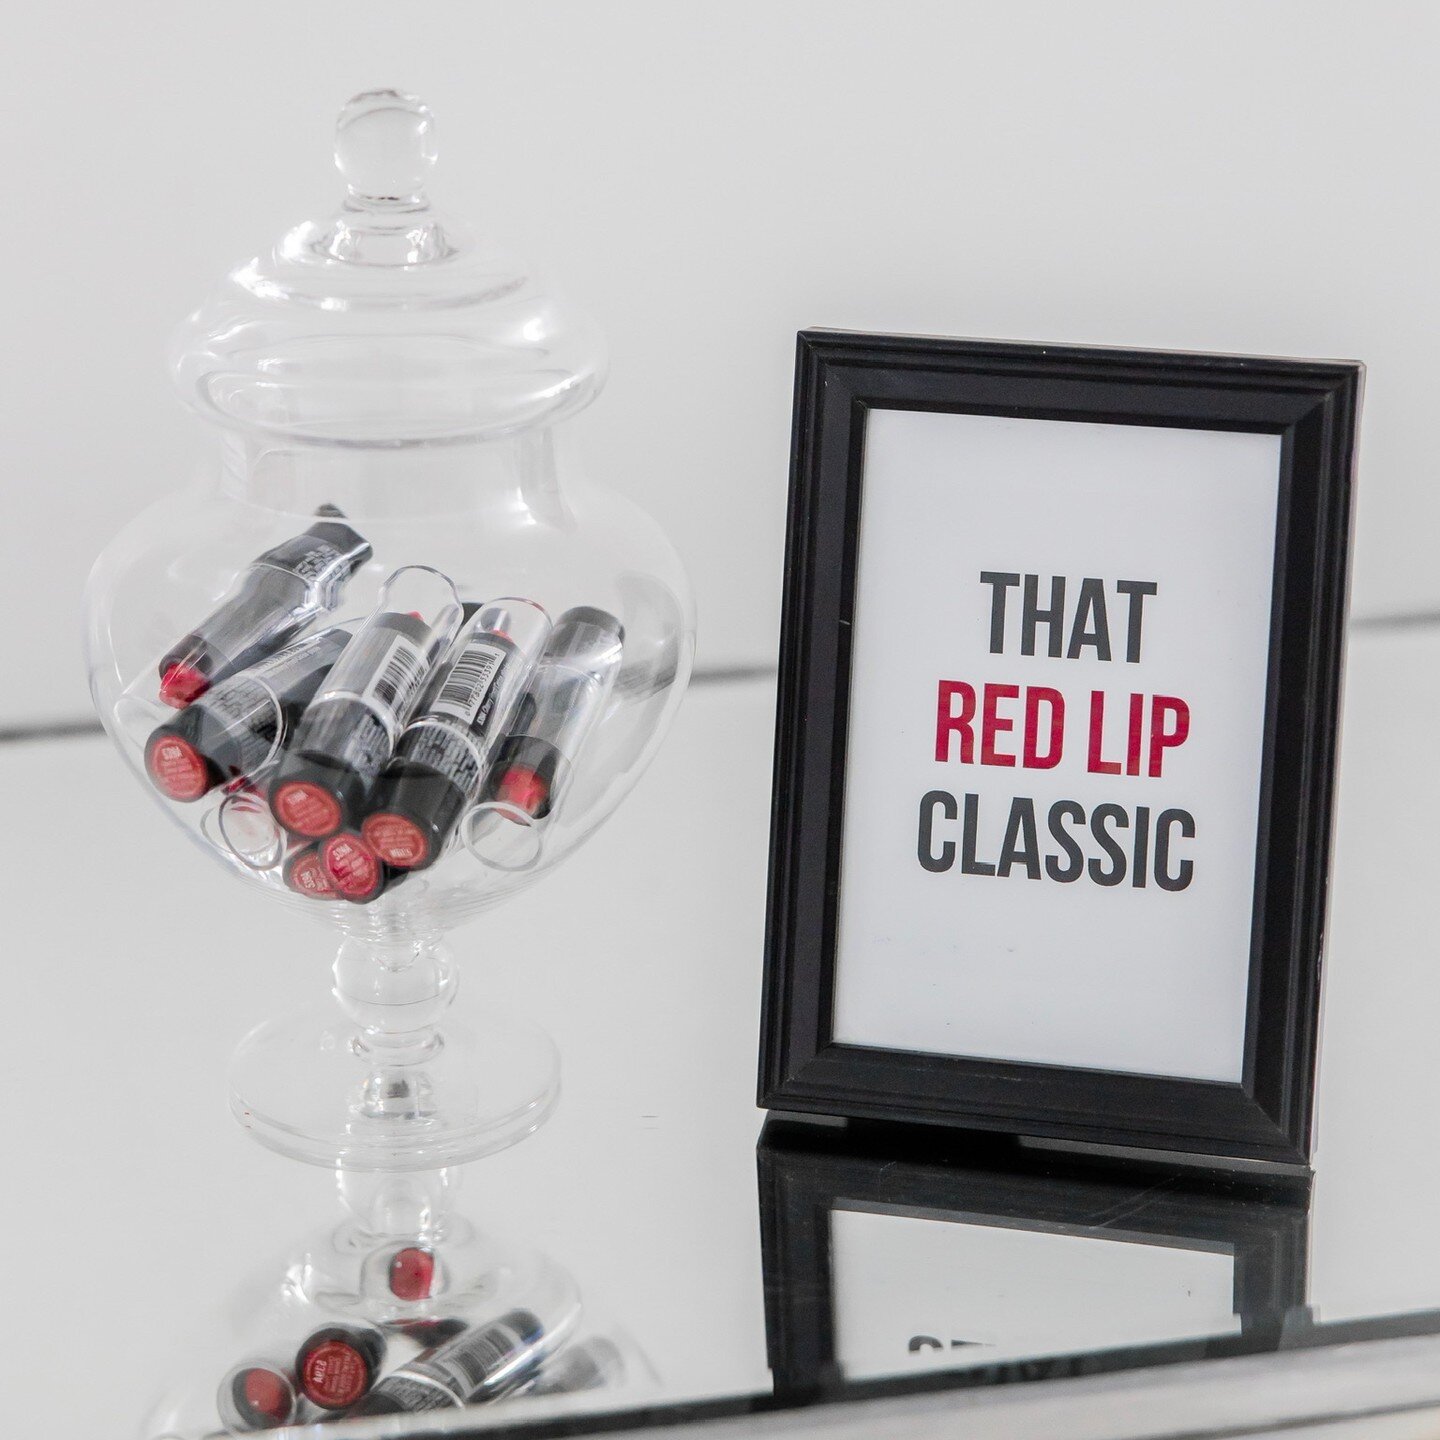 That 𝓡𝓮𝓭 lip classic thing that you like! Studio O is never going out of 𝓼𝓽𝔂𝓵𝓮&hearts;️ Our style is evolving everyday and we always keep up with the latest party trends🎉
*
*
*
#ohiopartyvenue #ohioeventspace #ohioeventvenue #taylorsversion 